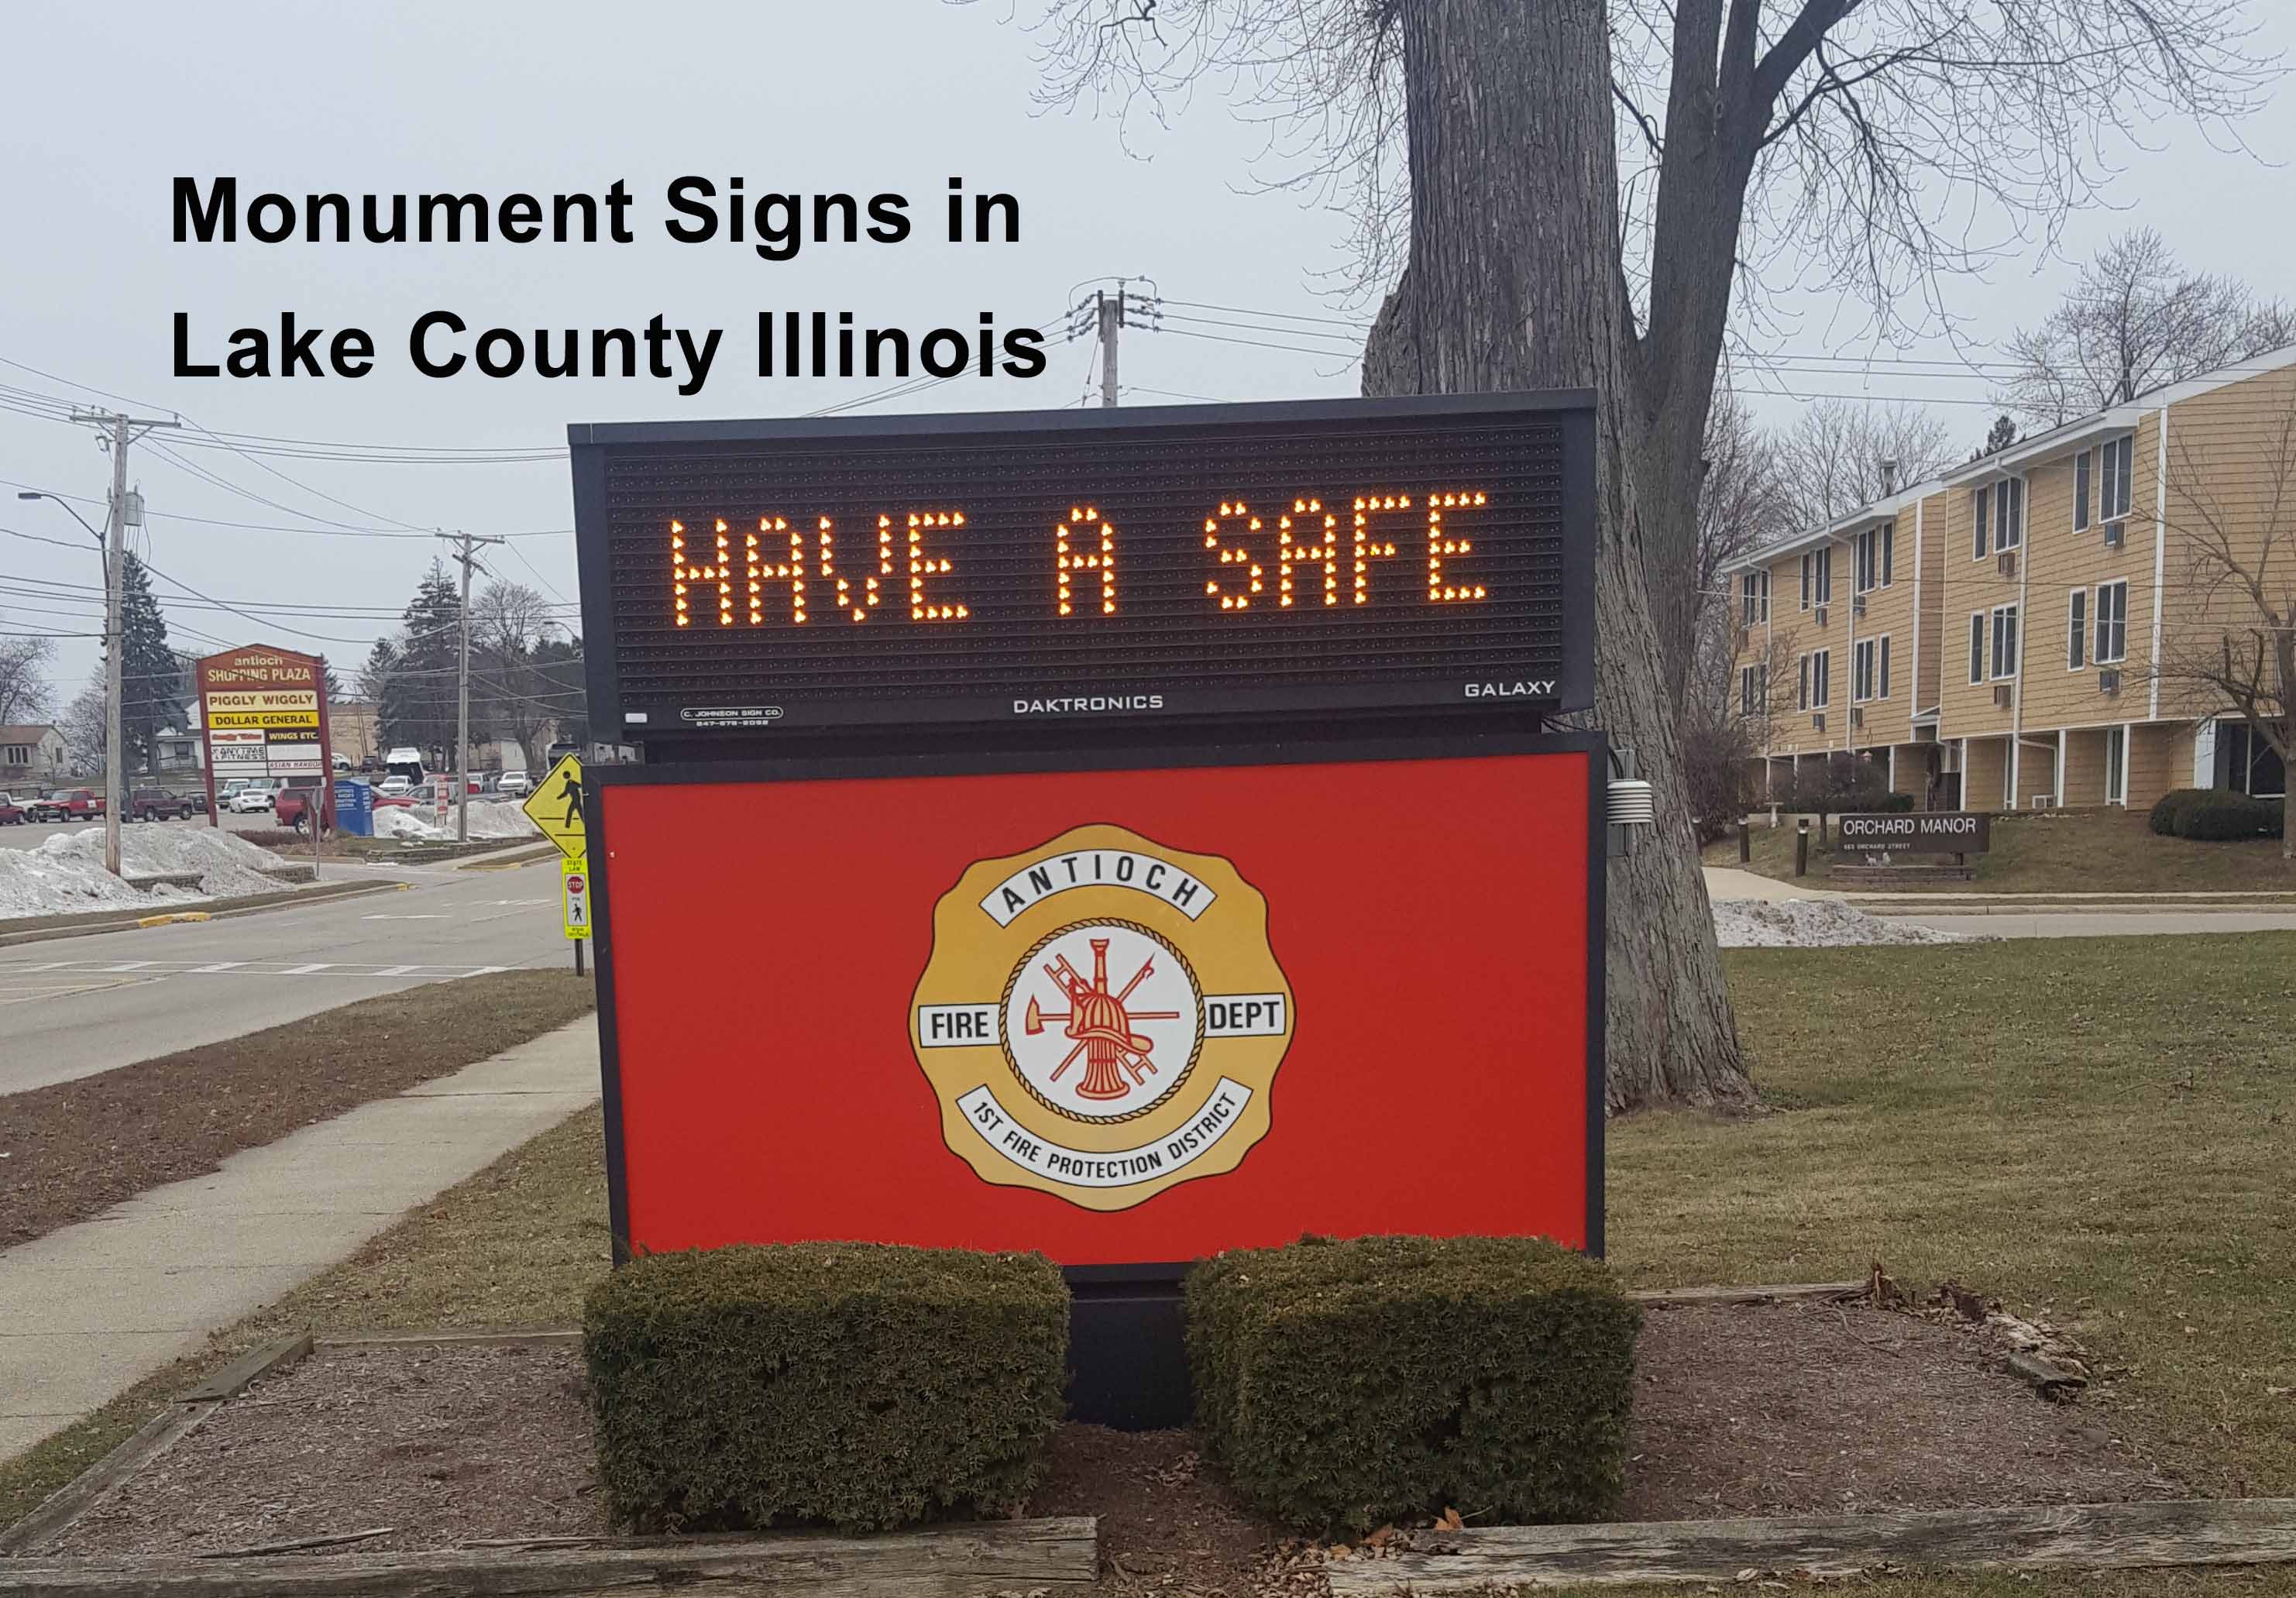 Monument Signs in Lake County Illinois